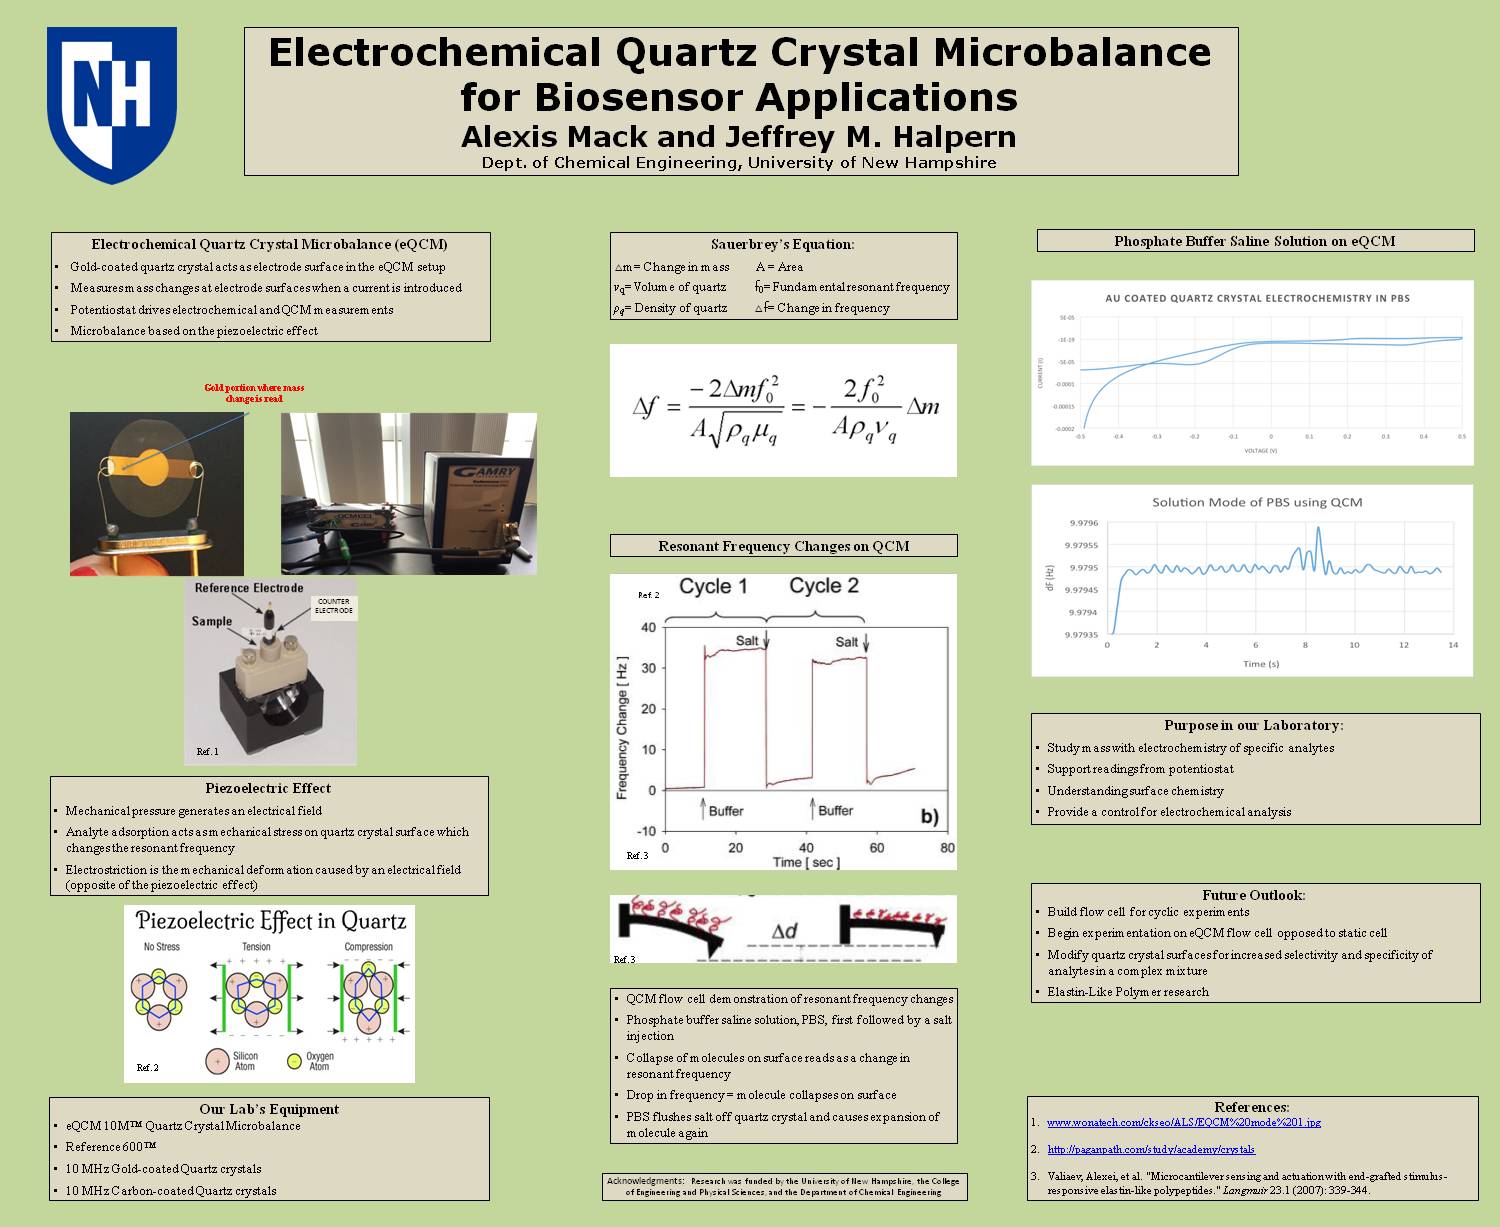 Electrochemical Quartz Crystal Microbalance For Biosensor Applications by am2113